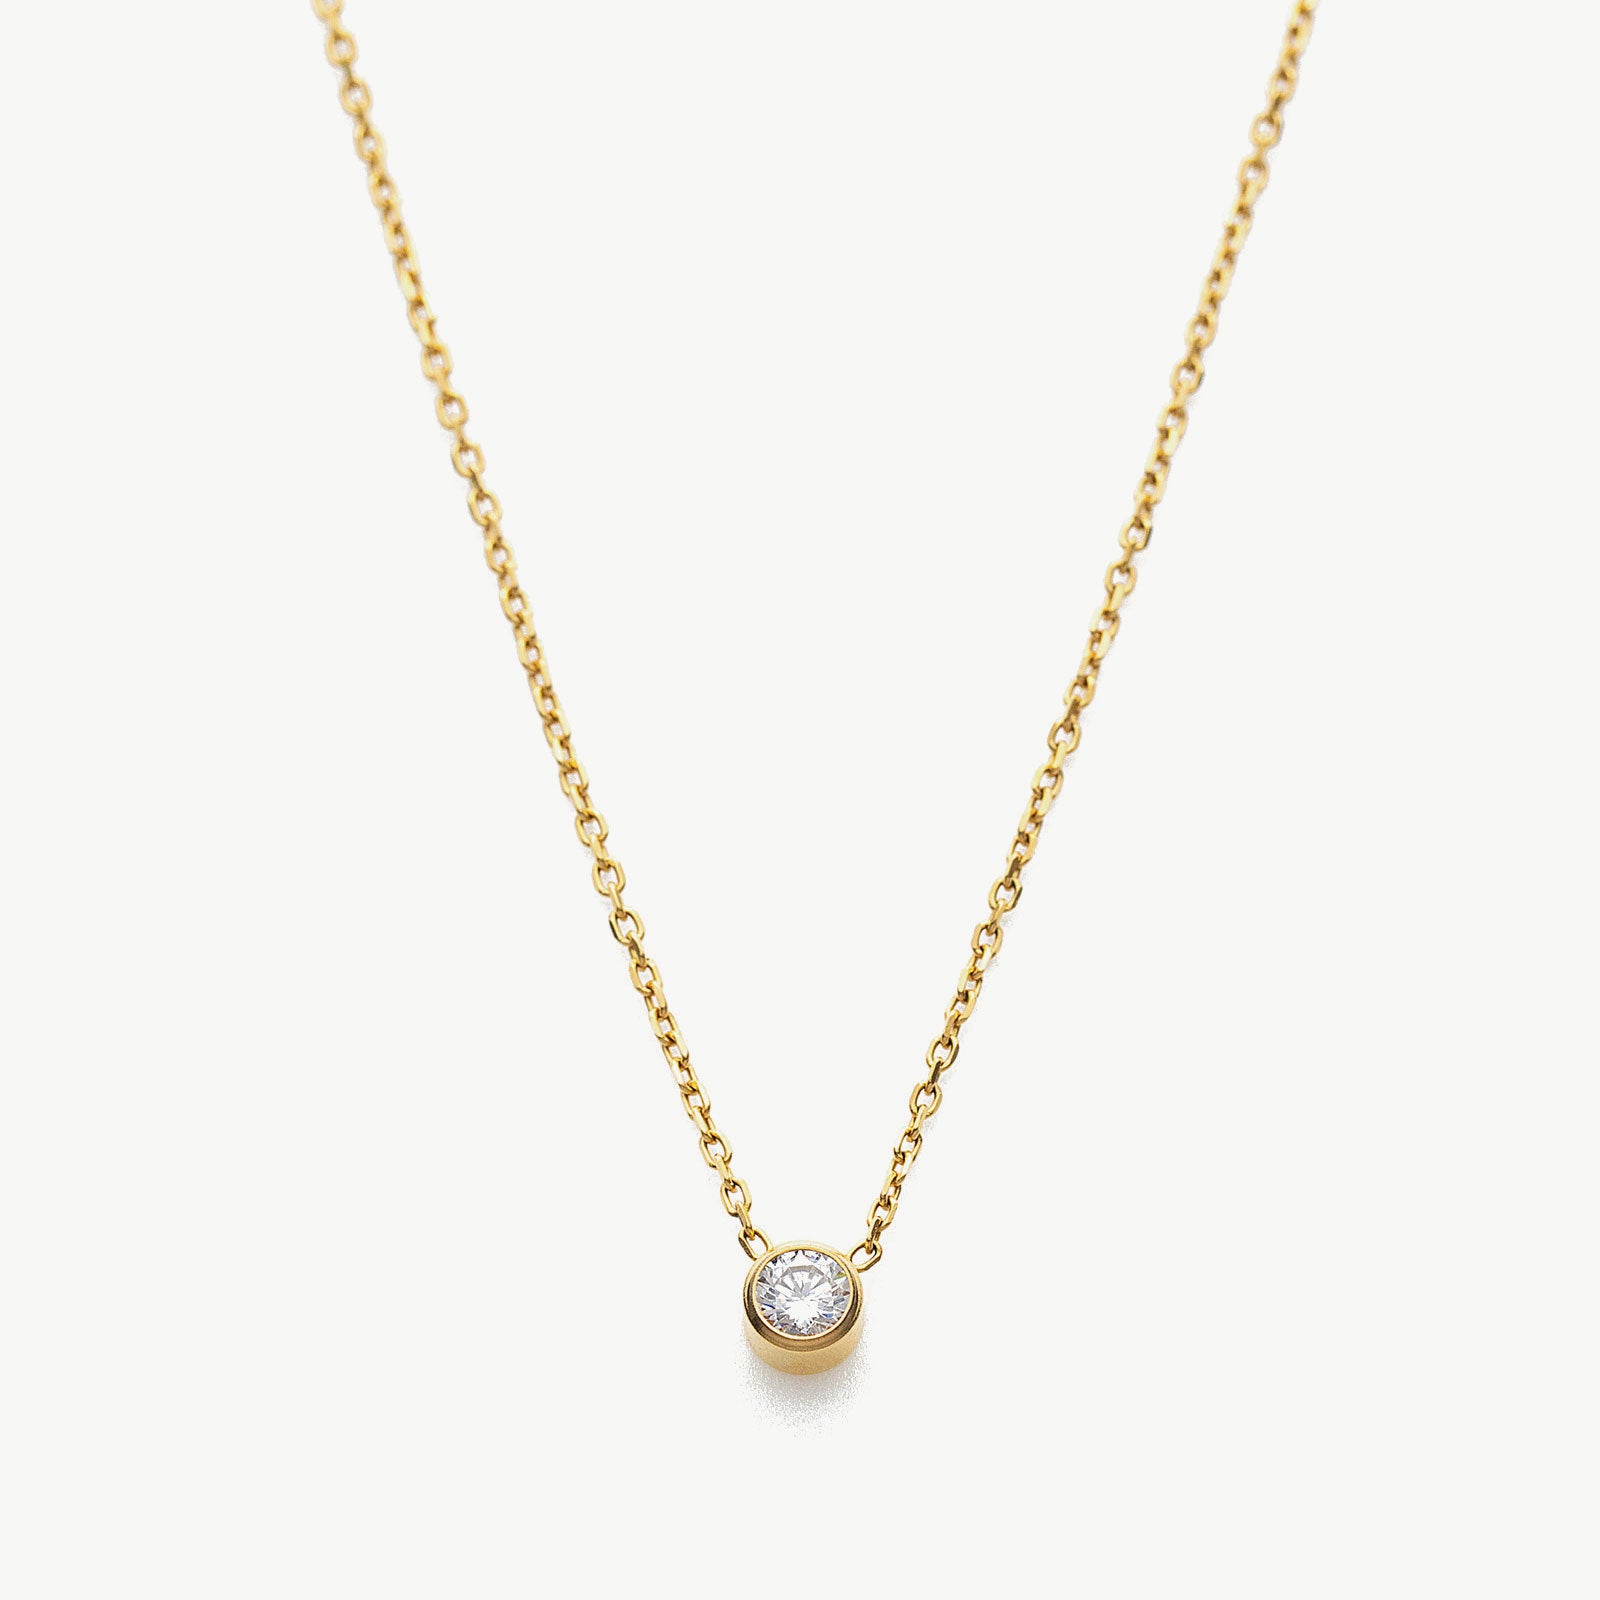  Crystal Pendant Necklace in Gold, showcasing a timeless gold pendant that adds a touch of elegance and sophistication to your neckline